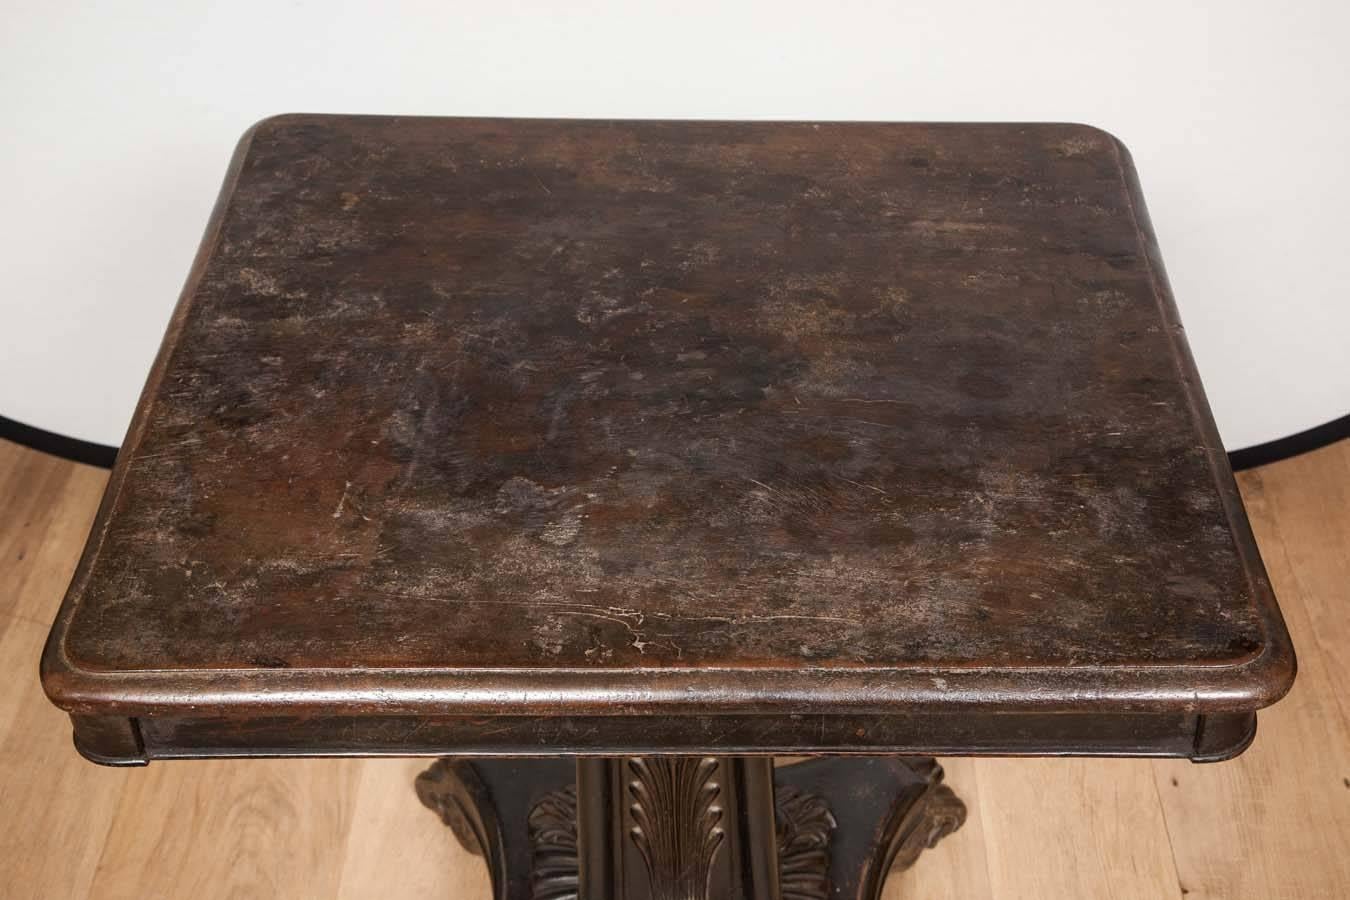 British Colonial 19th Cenutry Colonial Table, Probably from Calcutta Attributed to Lazarus